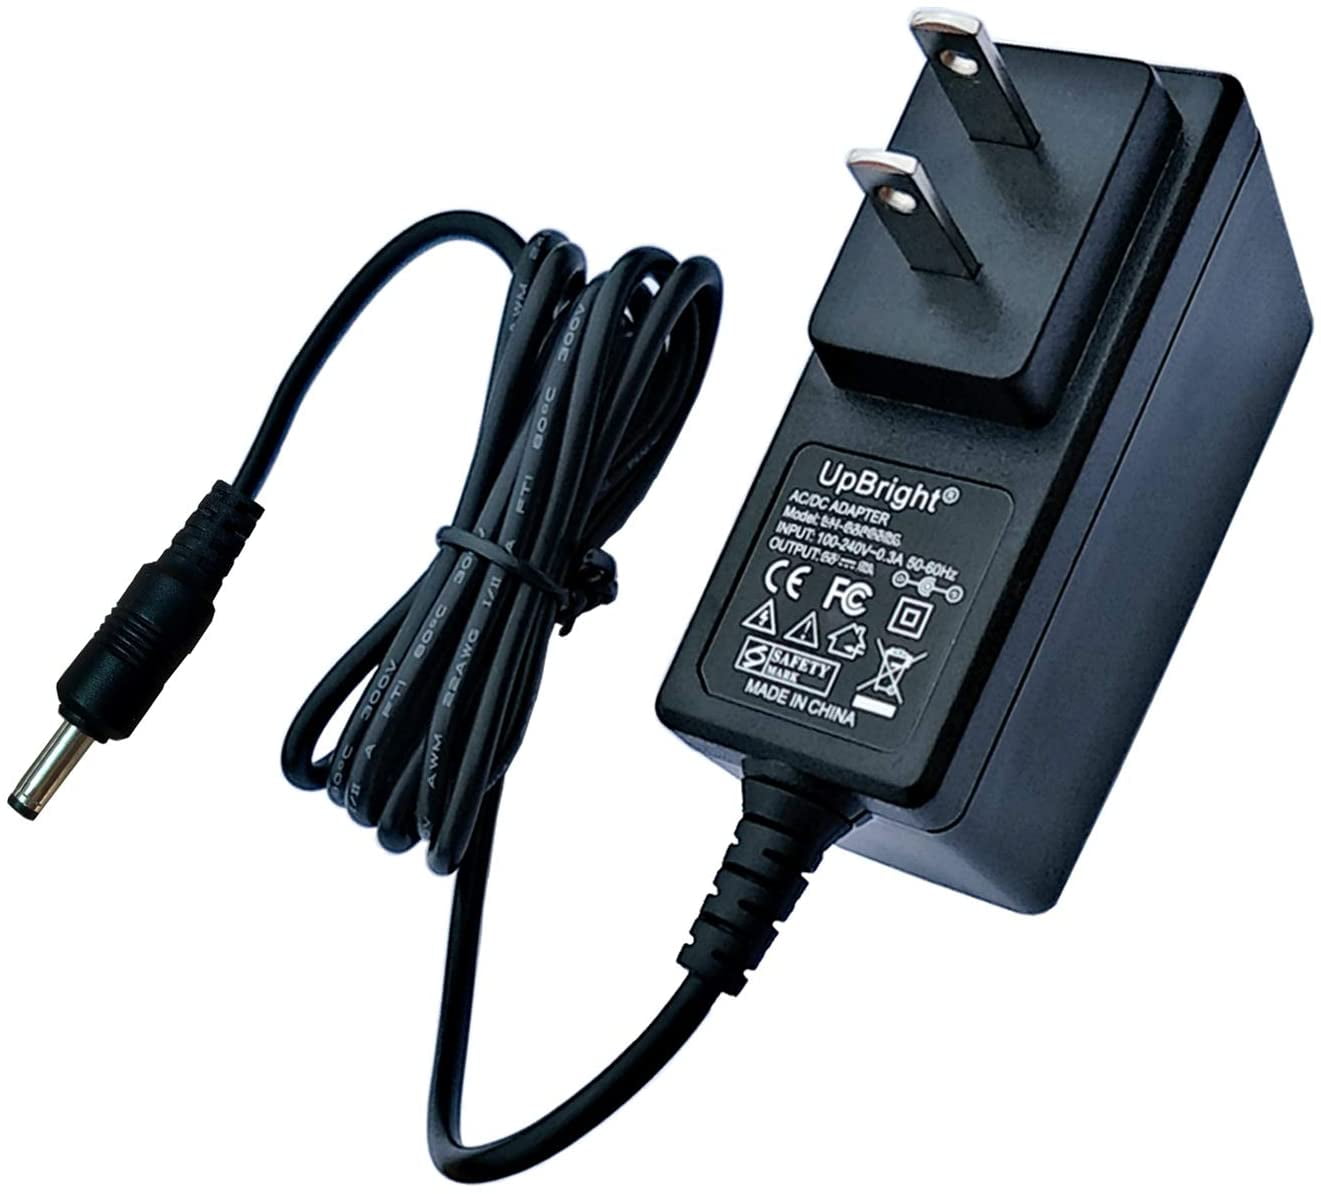 AC/DC Adapter for Ohaus SPX422 SPX621 SPX622 SPX6201 Lab Balance Compact Gold Portable Scale Power Supply Cord Cable PS Charger Mains PSU